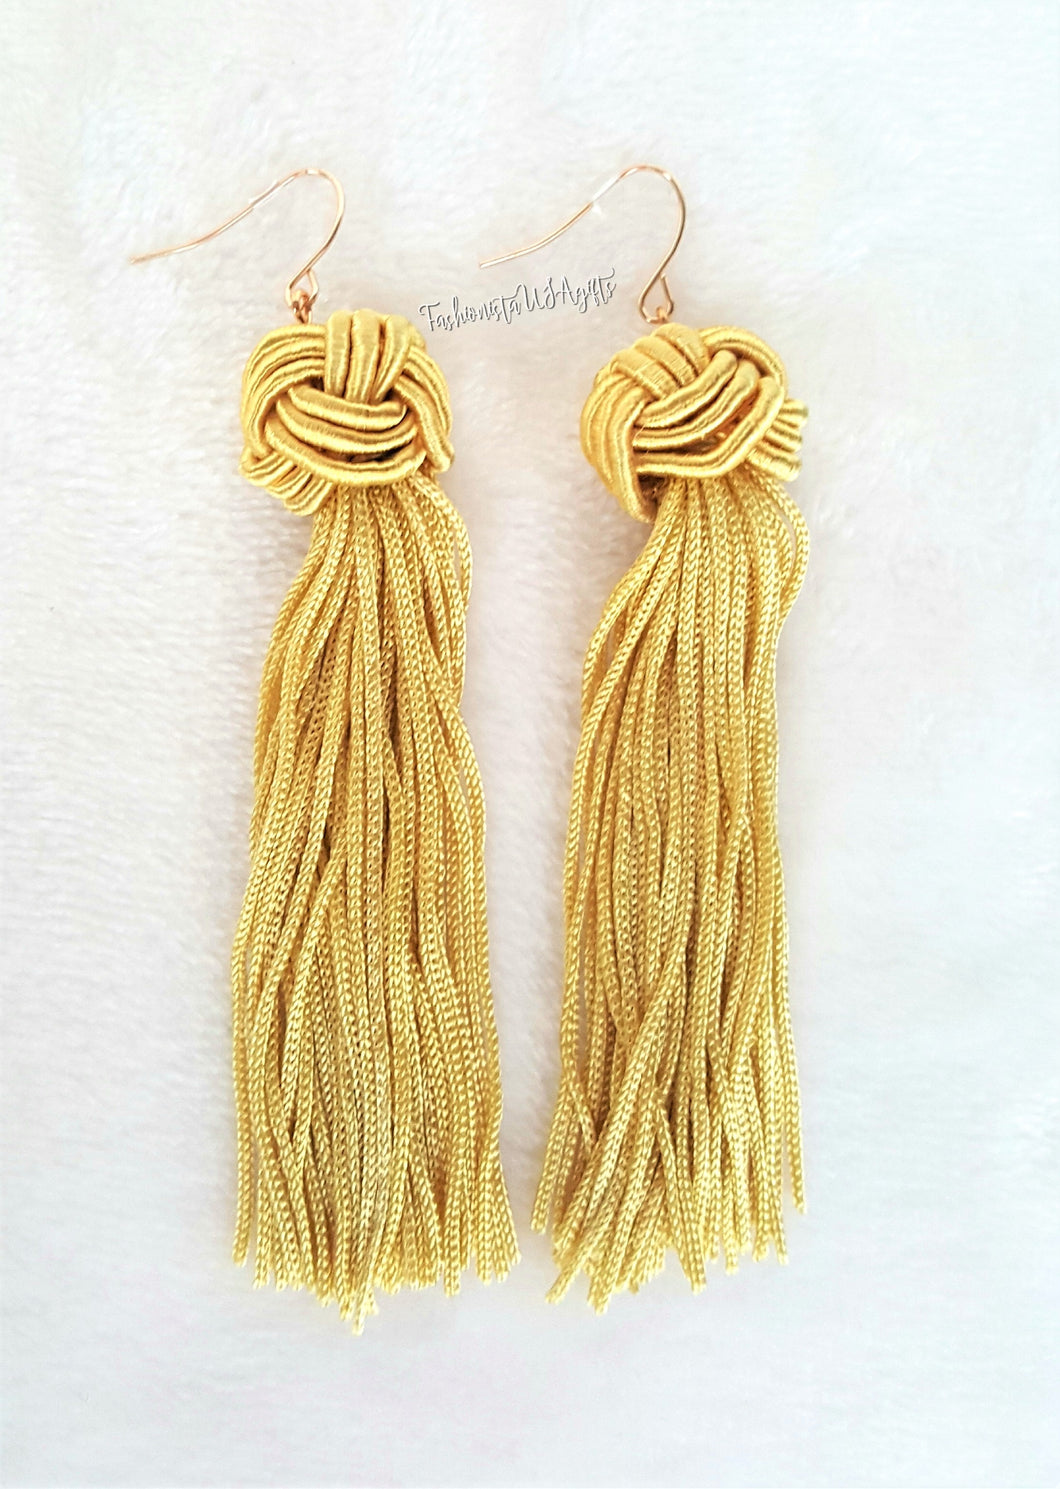 Earrings Knotted Tassel Mustard Gold, Boho Earrings, Beach Earrings, Chic Fashion Earrings, Statement Earring, Gifts for Her - Urban Flair USA